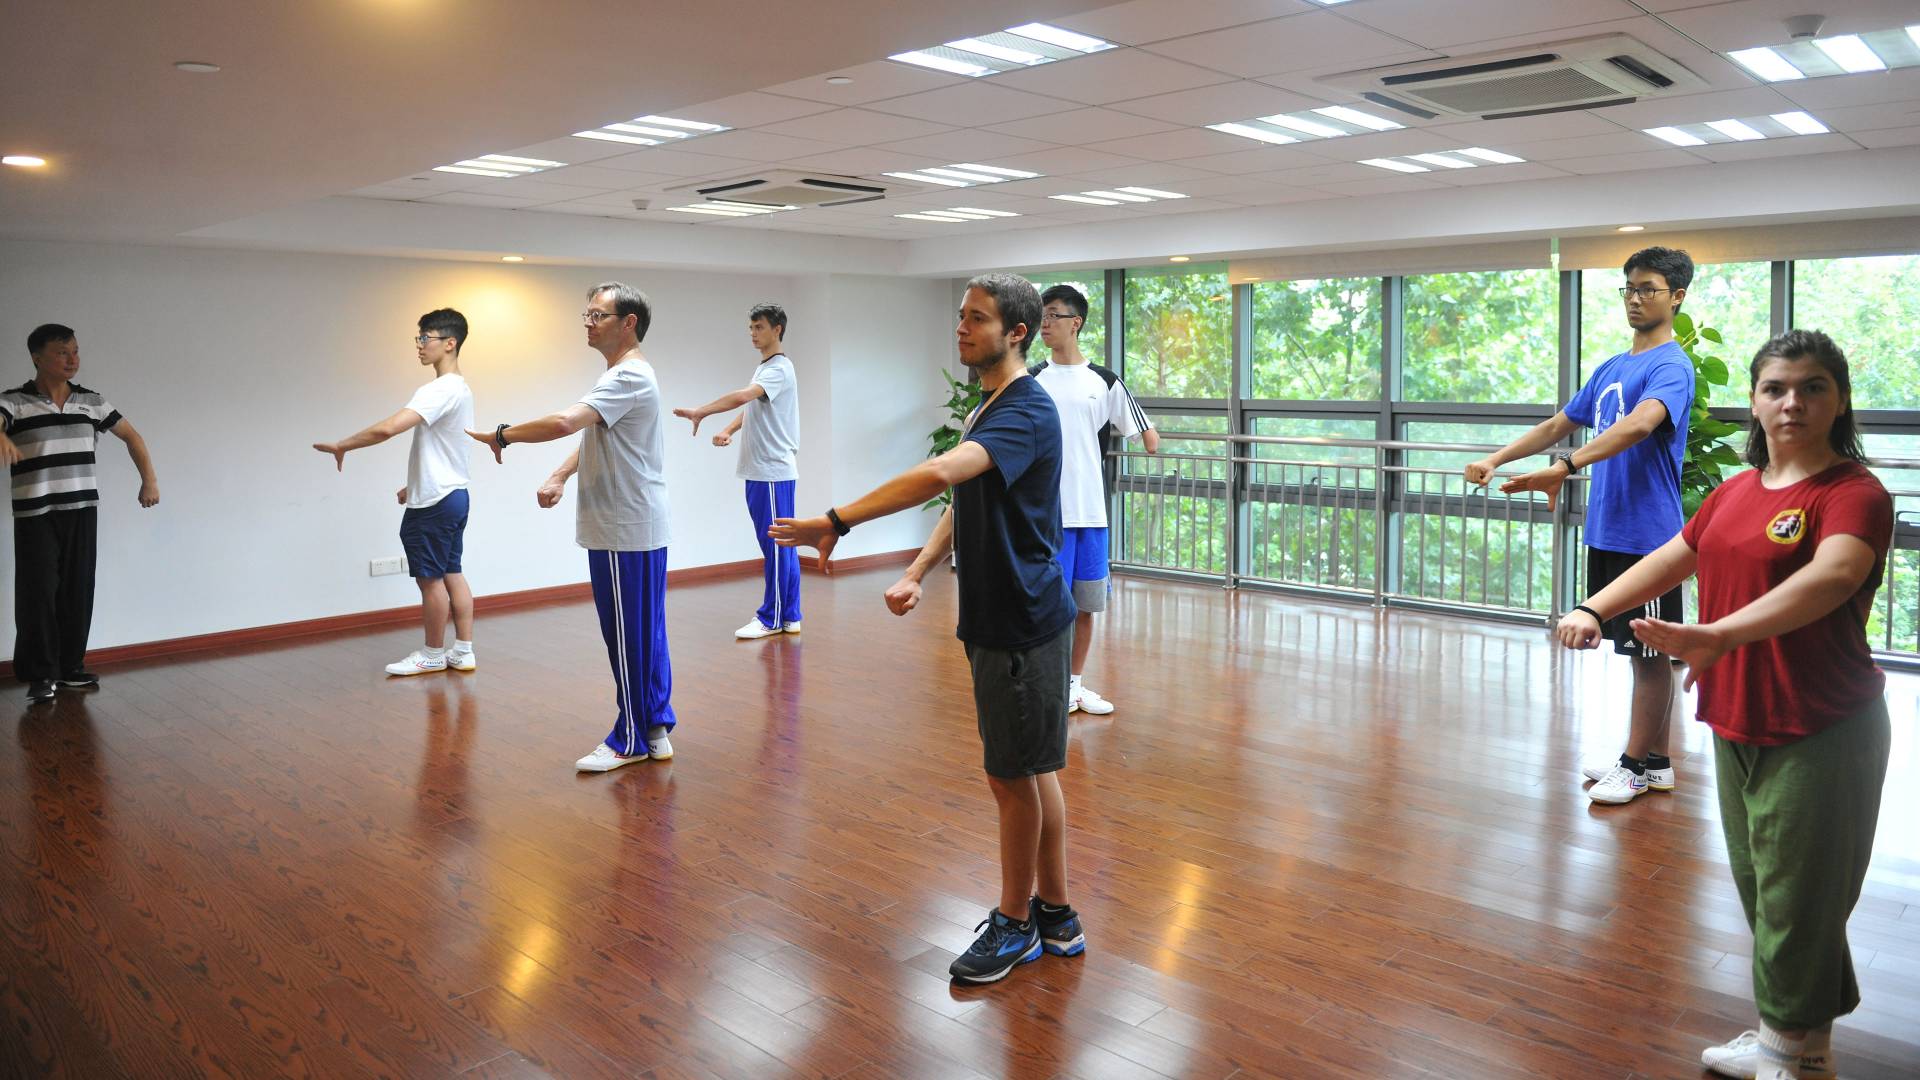 Students rehearsing a dance